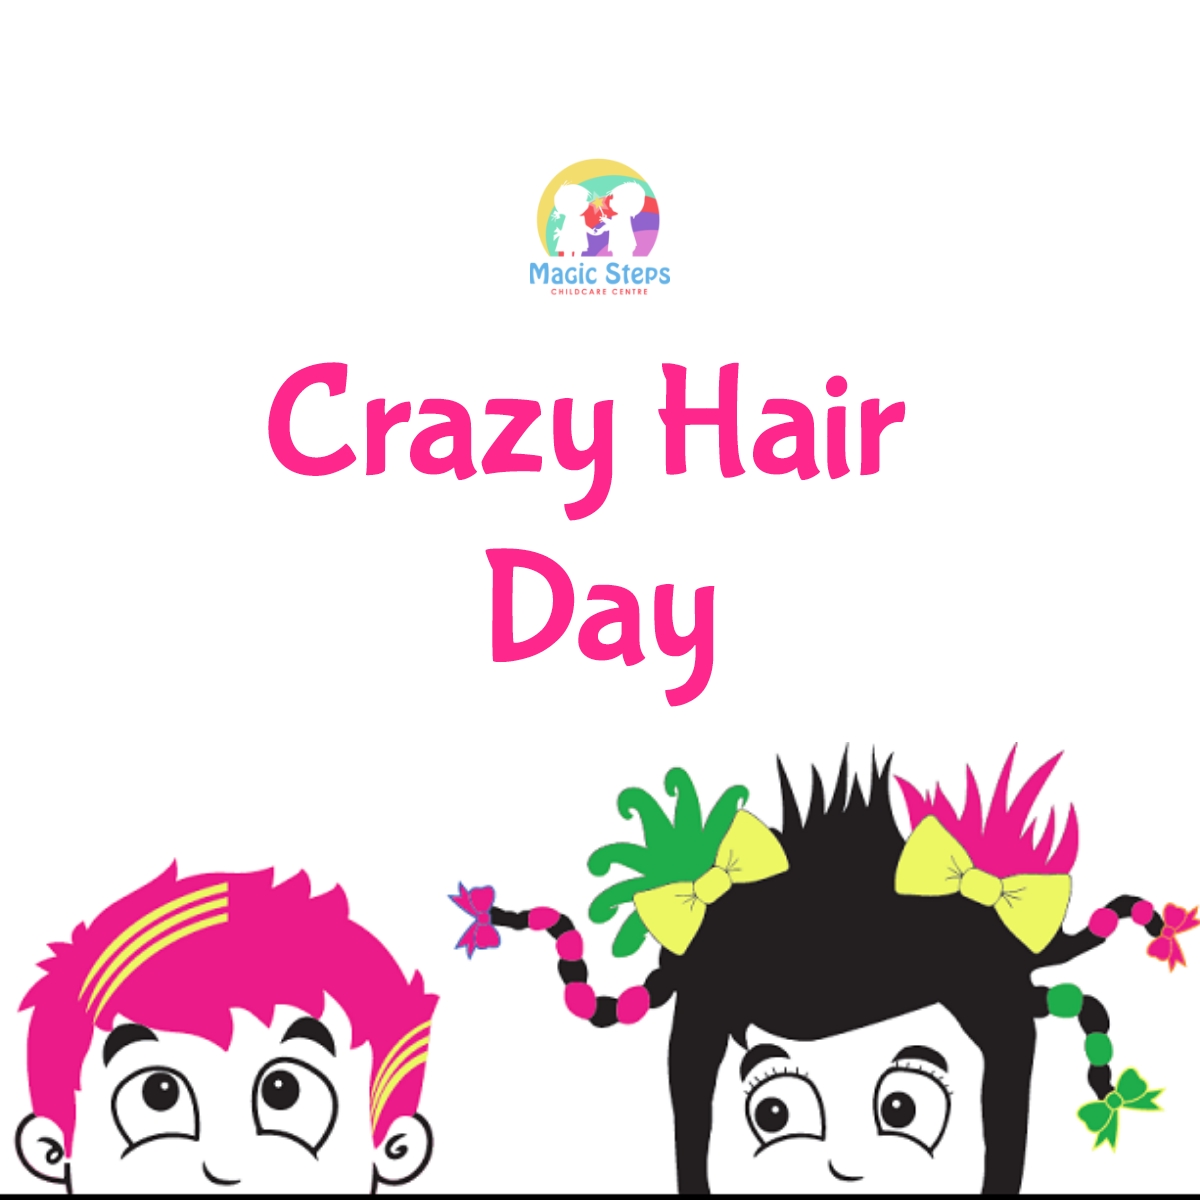 Crazy Hair Day-Friday 5th March